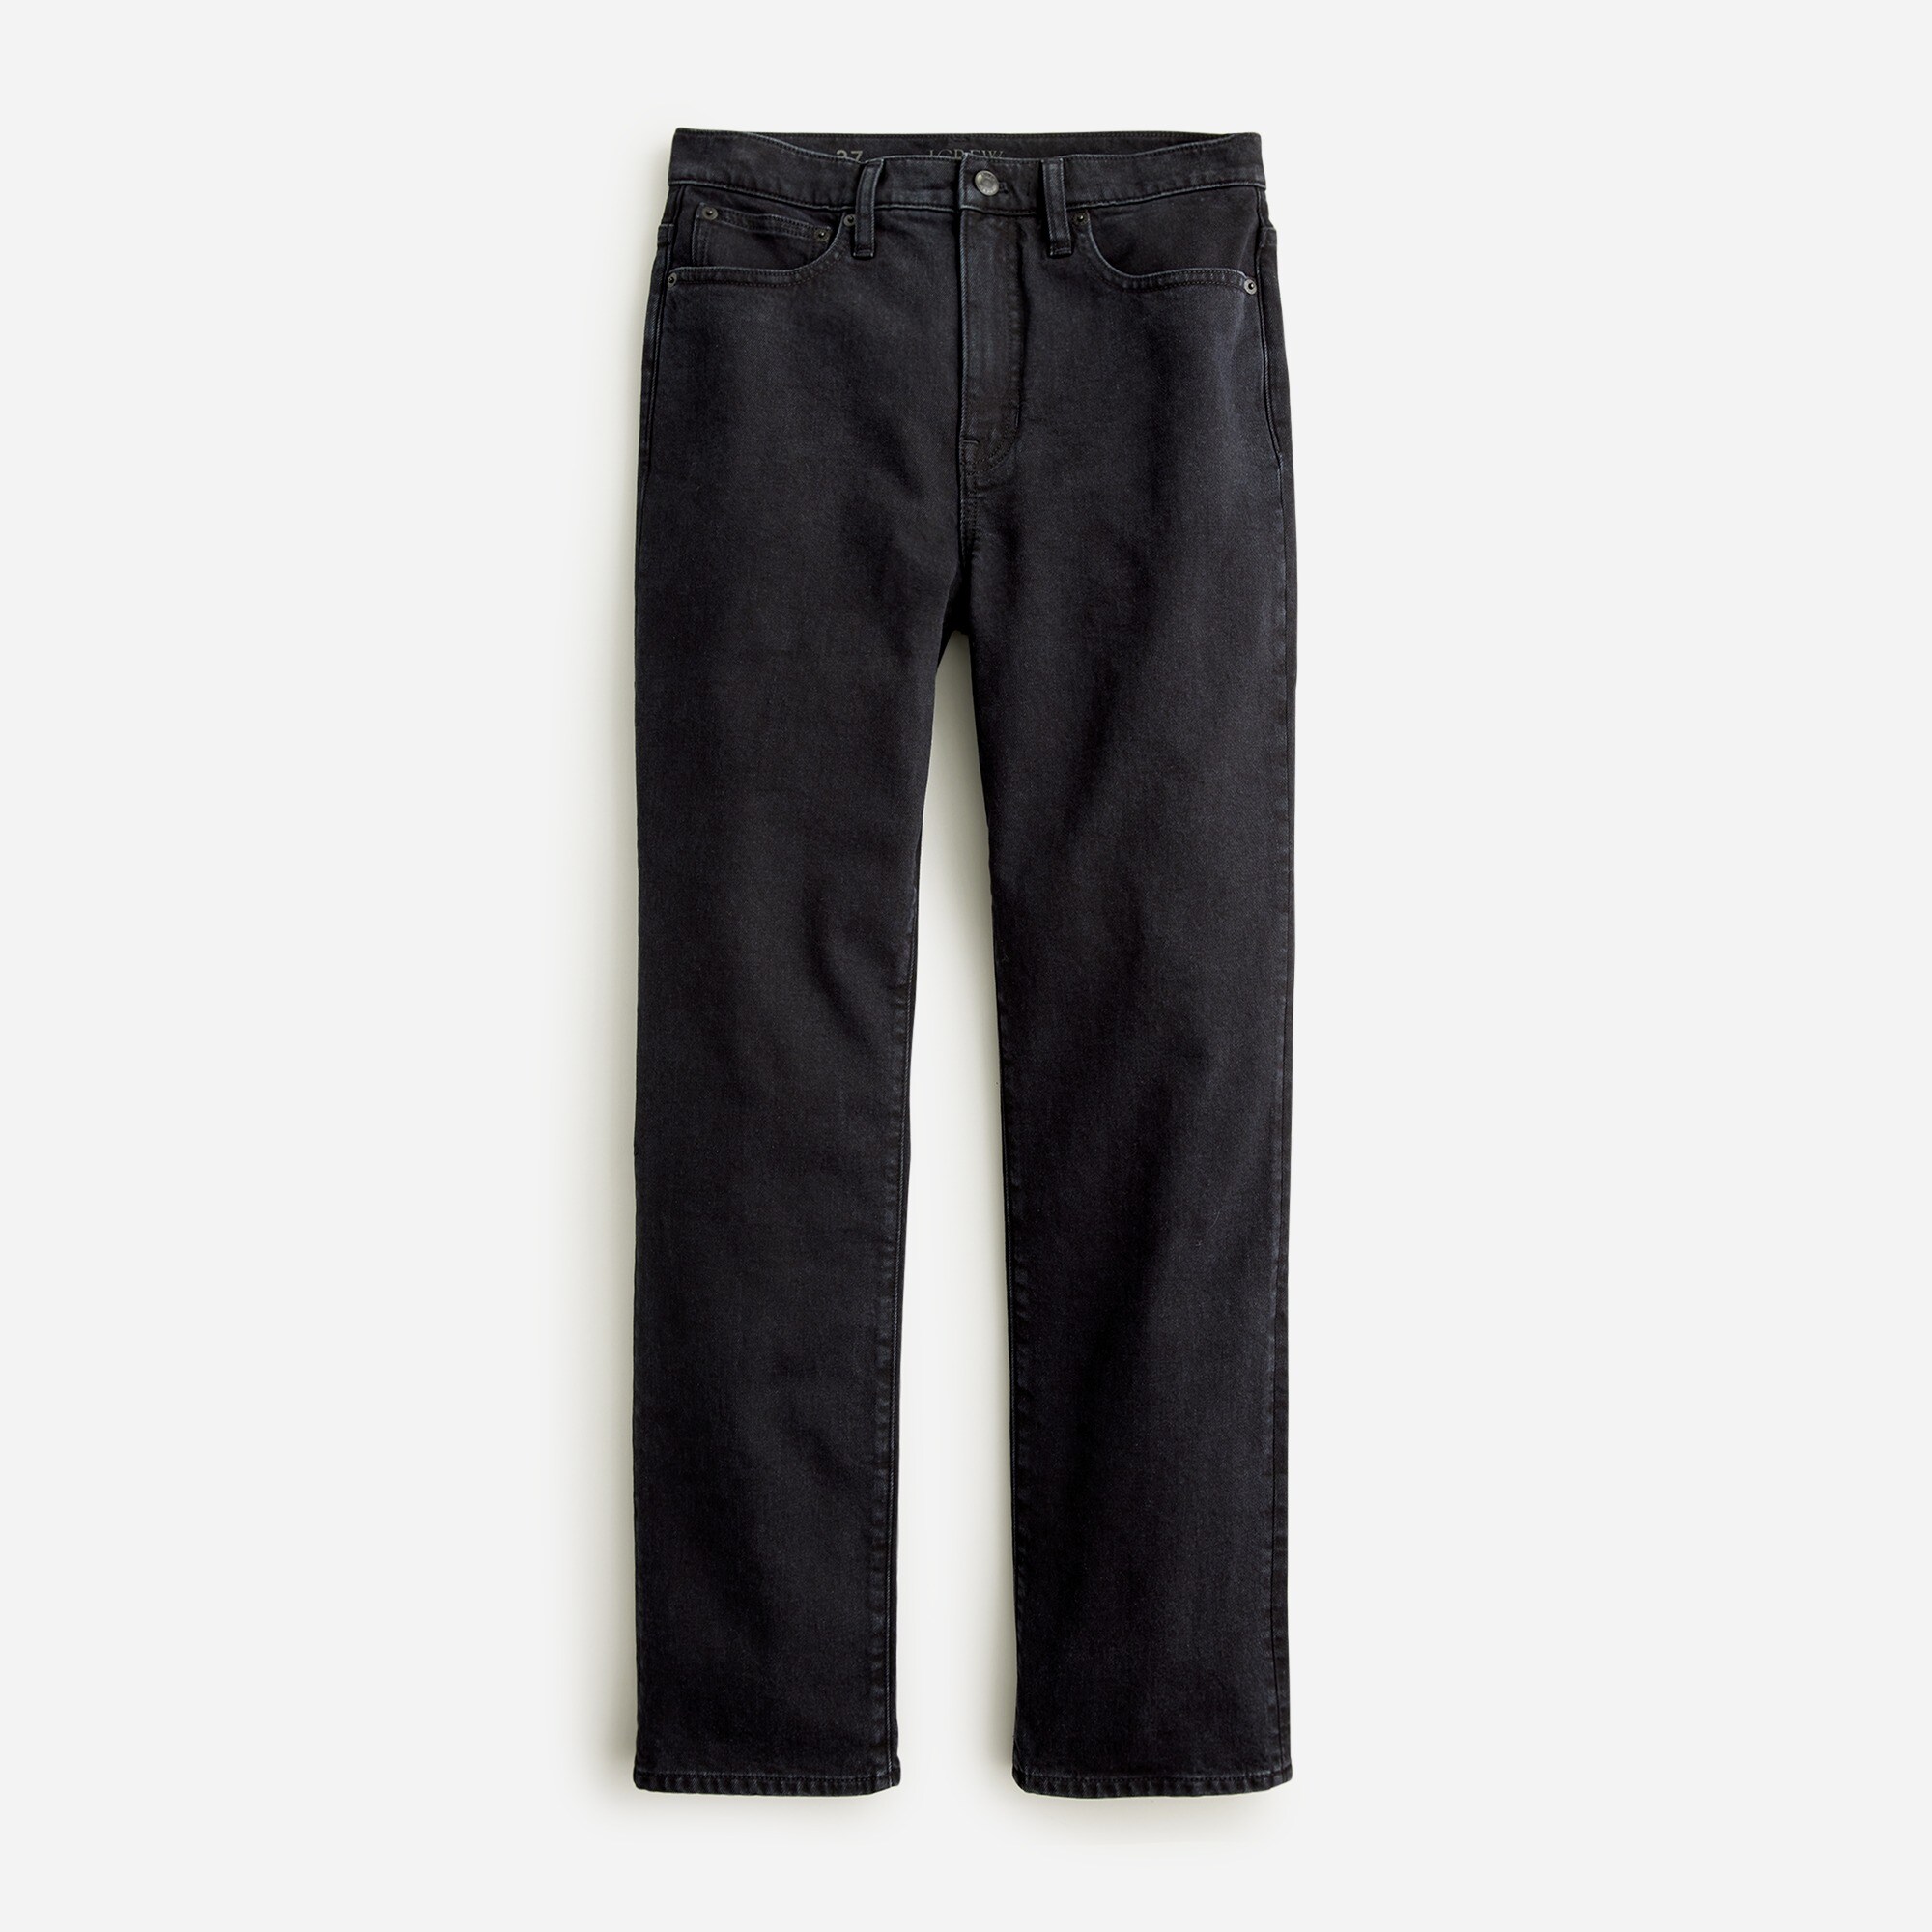  Petite classic straight jean in washed black